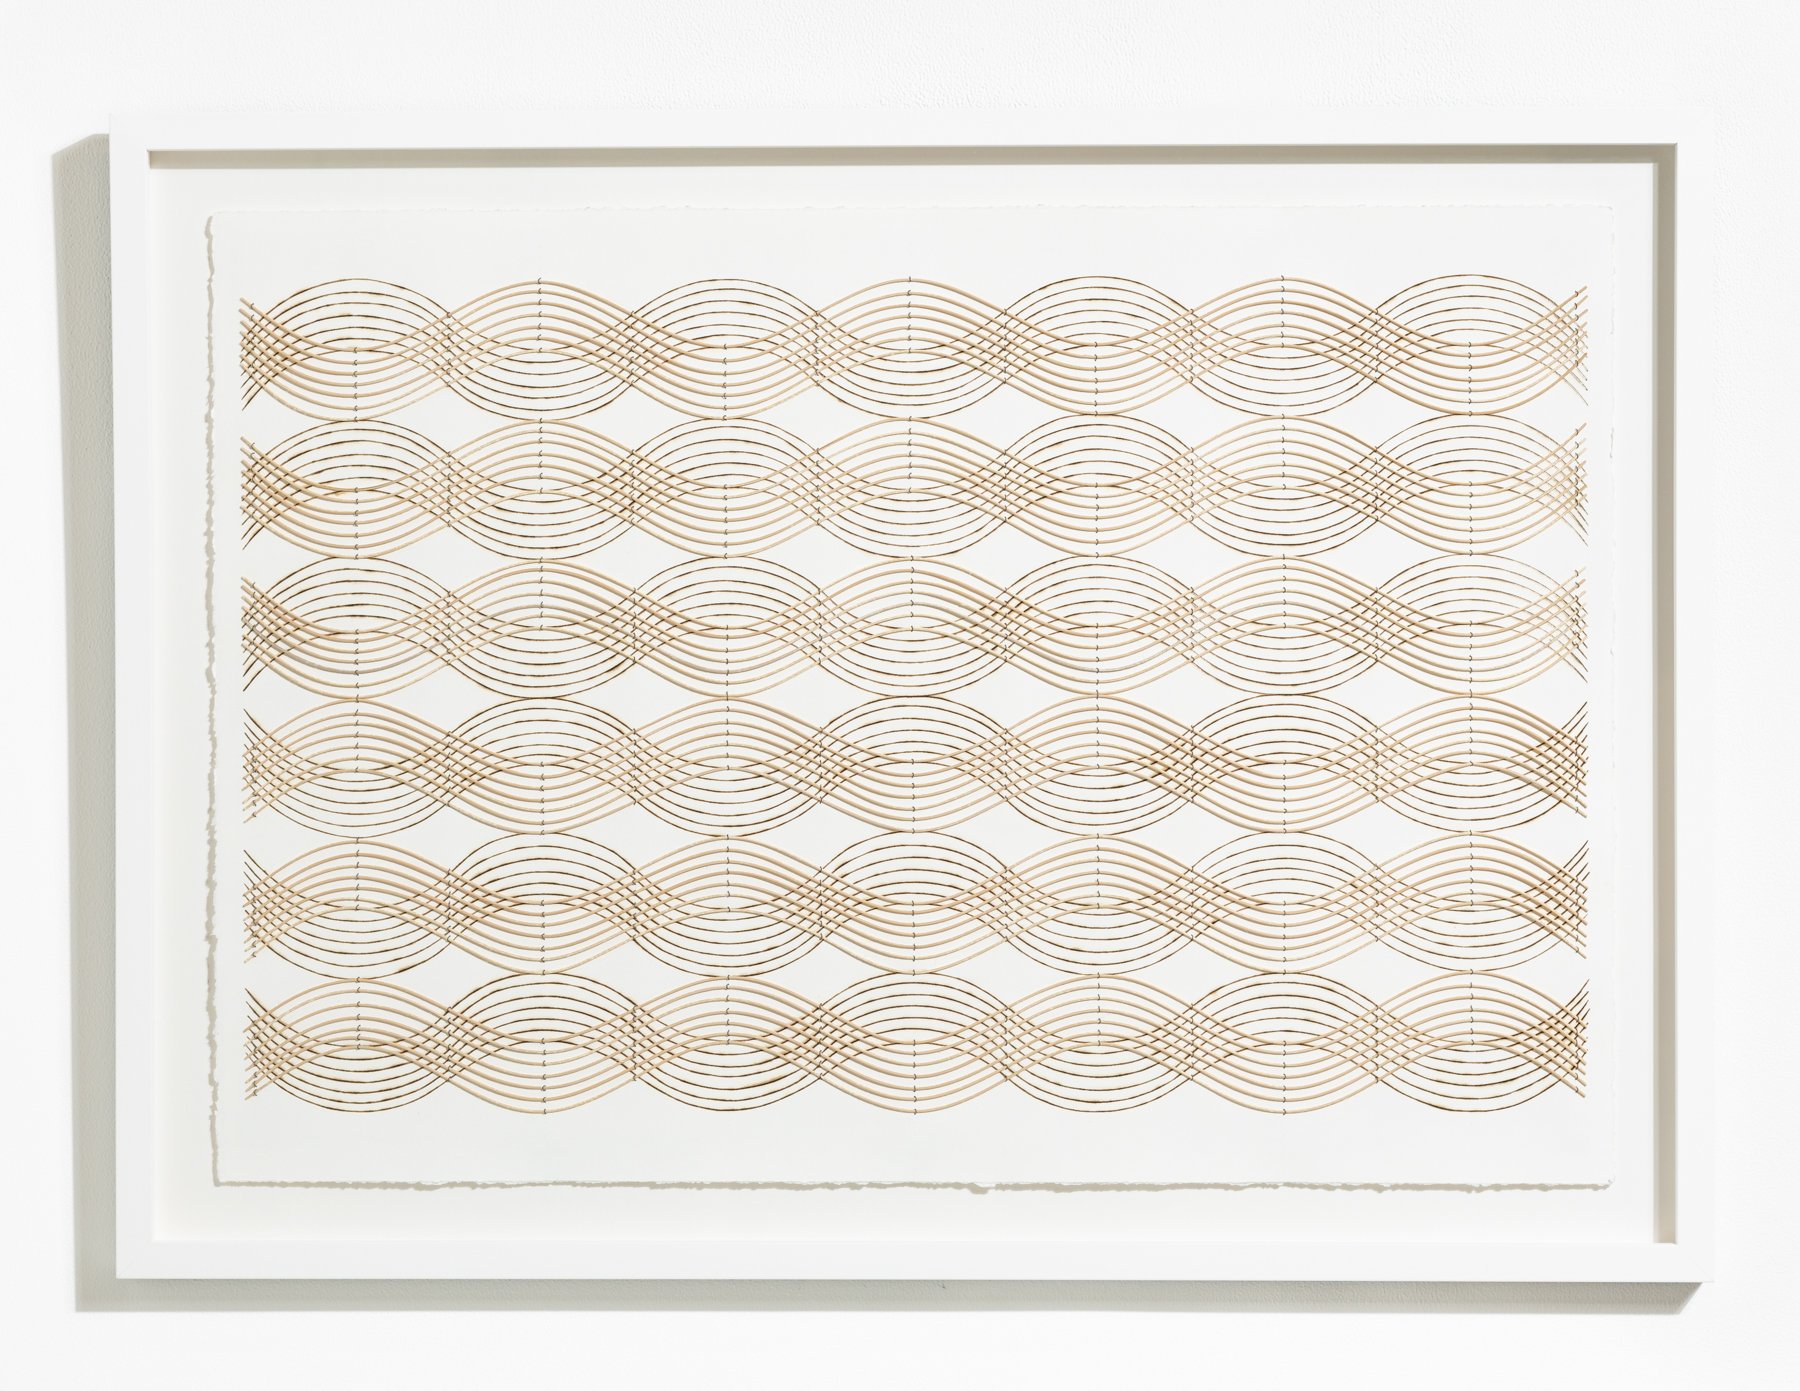 "Surface Tension" Geometric Art with Burned Lines and Dyed Reeds on Paper by Katrine Hildebrandt-Hussey @ Soapbox Arts Gallery, Burlington, VT 